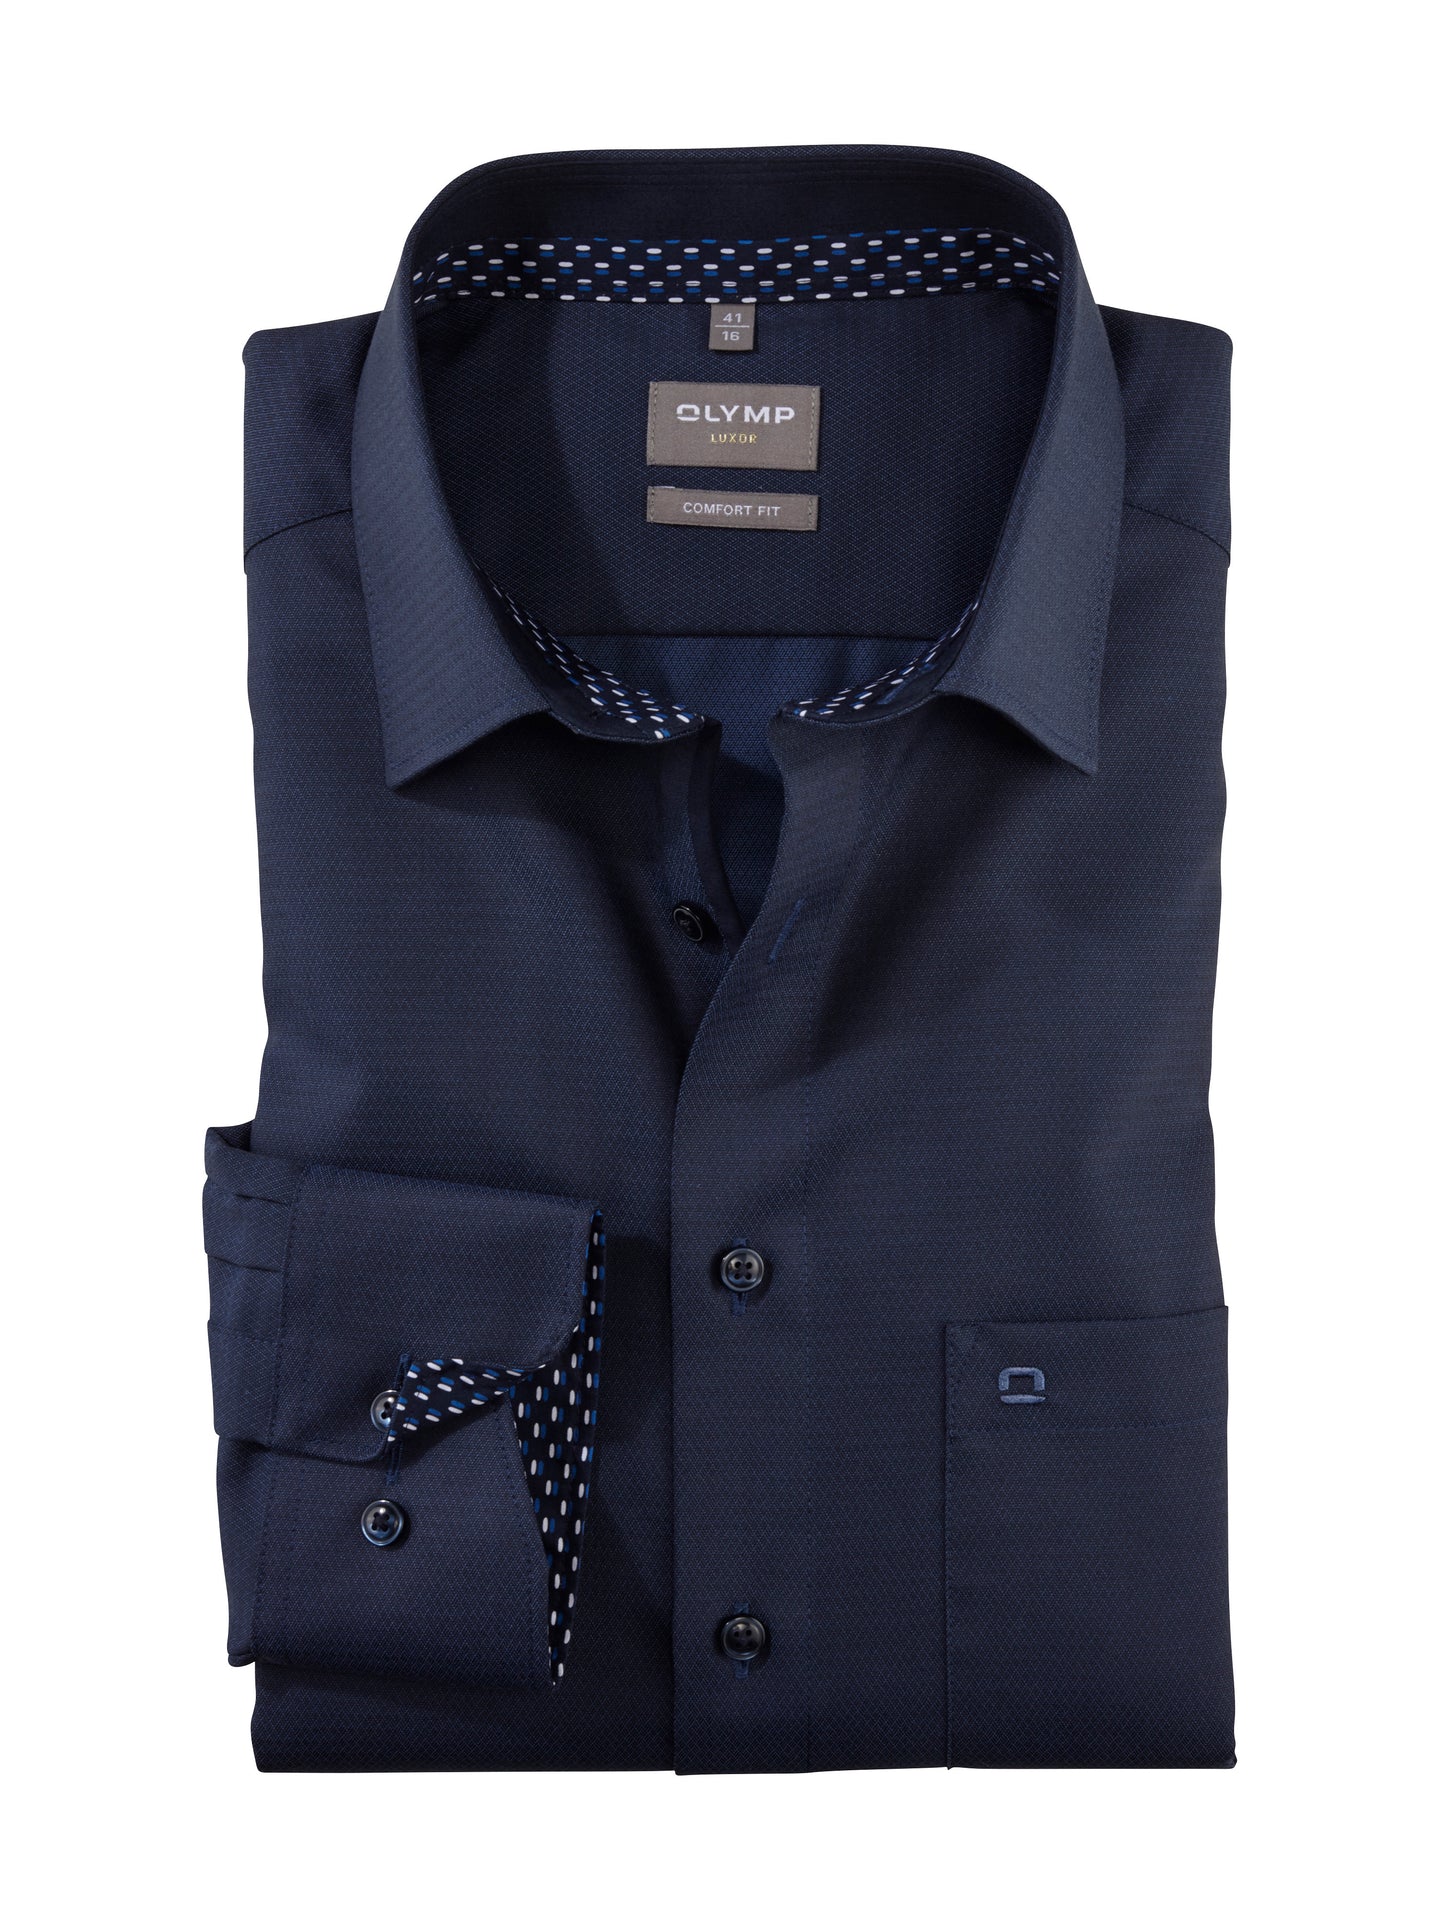 Olymp 1062 44 14 | Comfort Fit Shirt in Navy with Trim